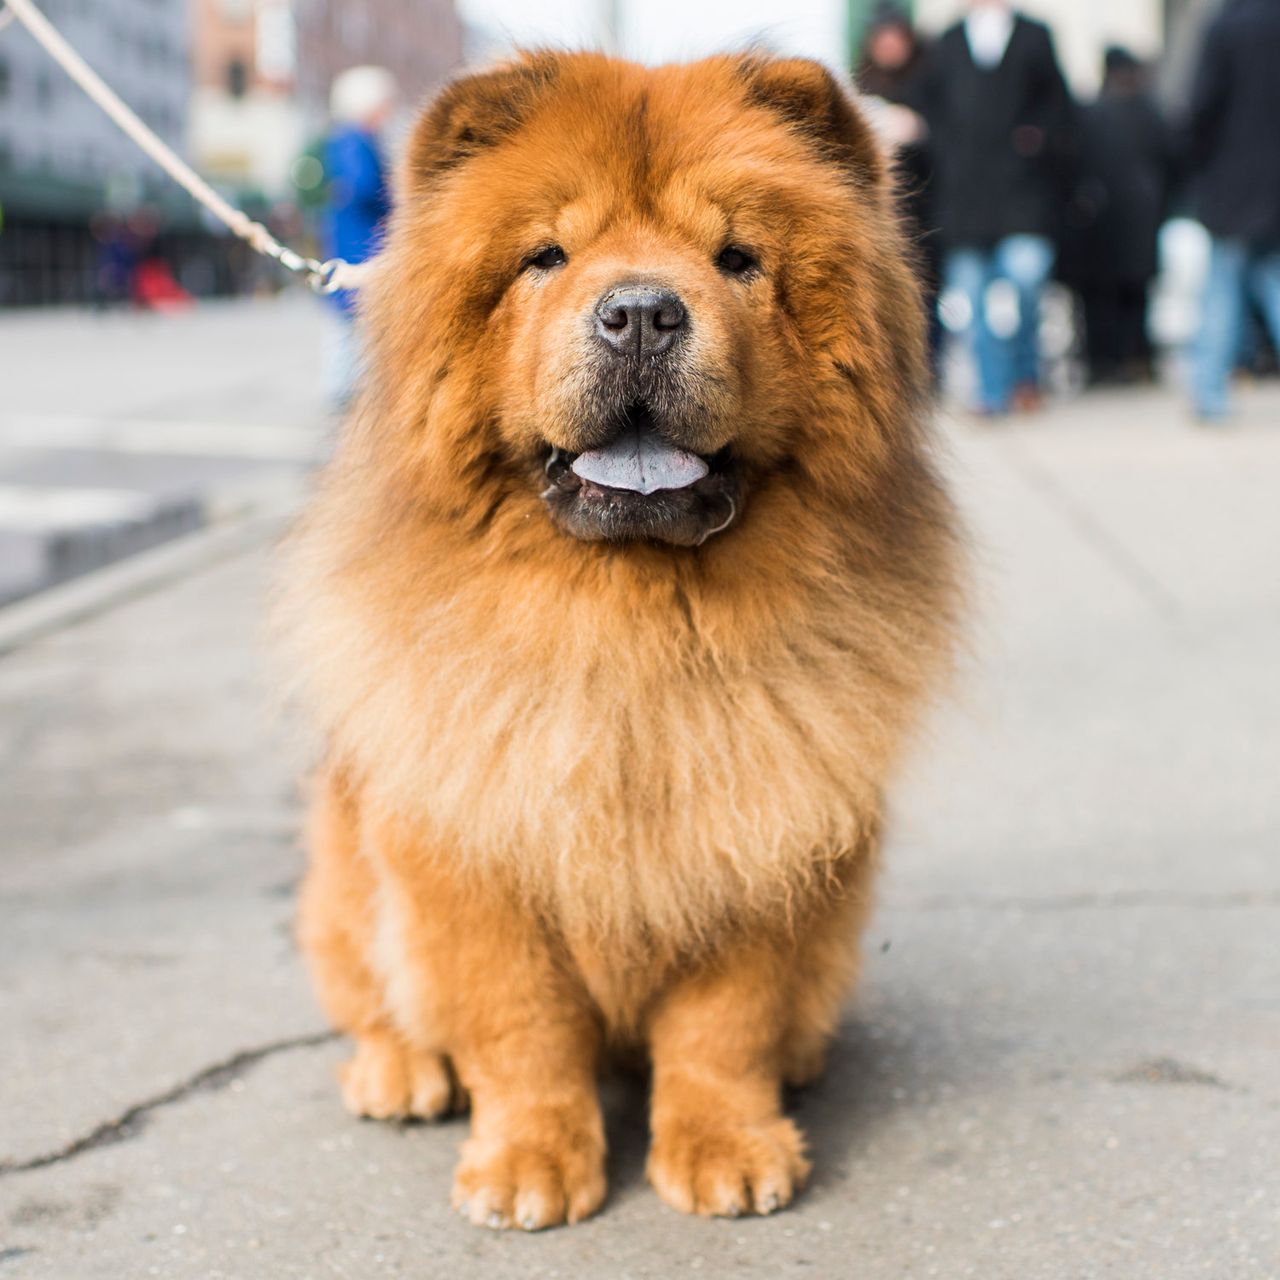 Bamboo, Chow Chow. Excerpted from <em>The Dogist </em>by Elias Weiss Friedman (Artisan Books). Copyright © 2015. Photographs by The Dogist, LLC.